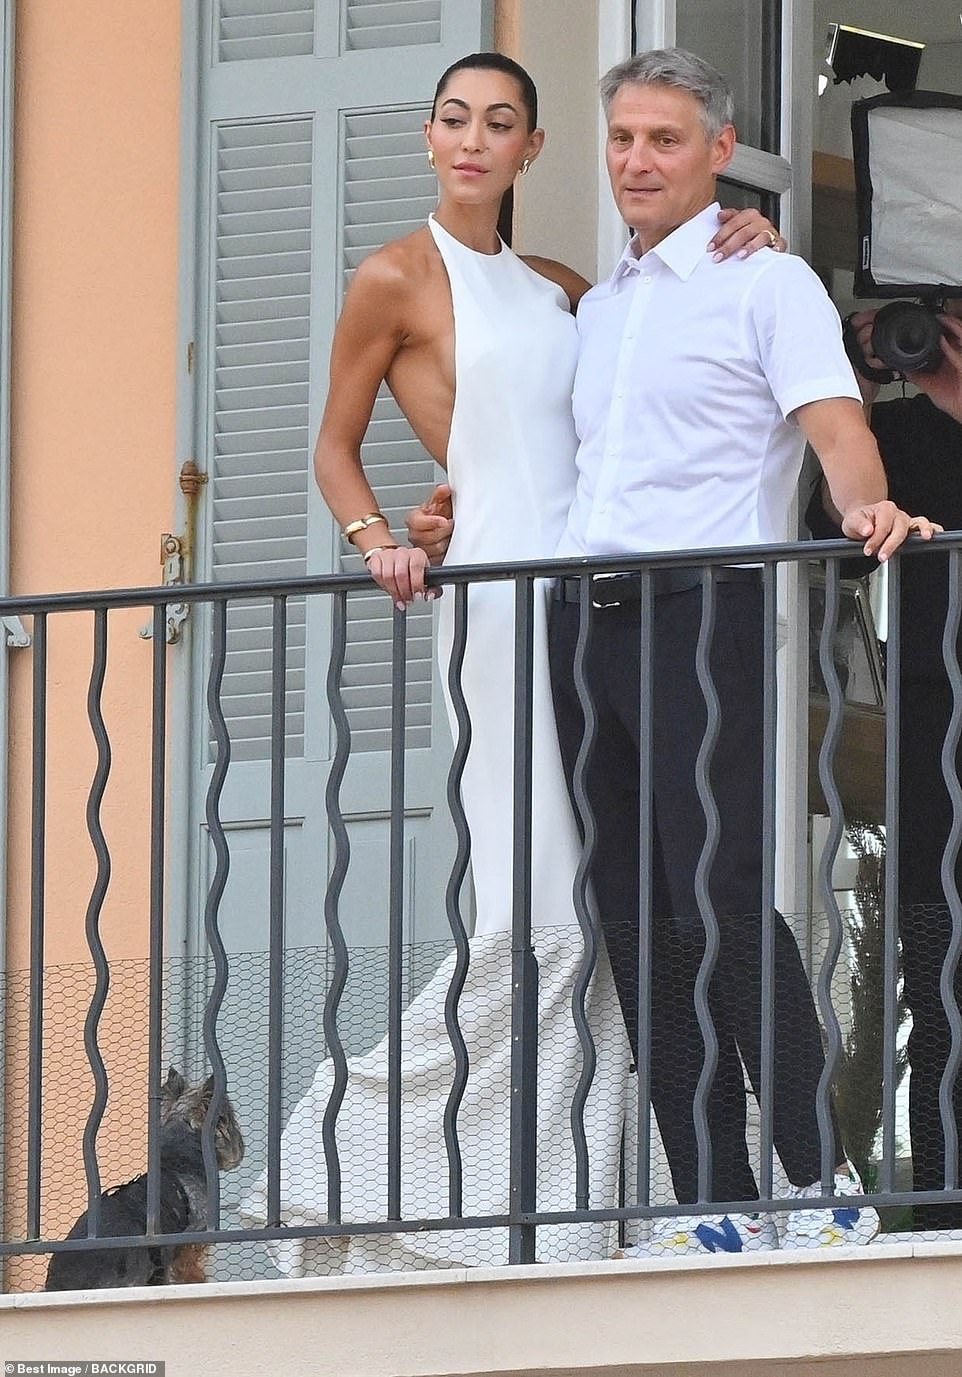 The couple donned matching white outfits as they waited for their guests to arrive in Saint Tropez on Thursday